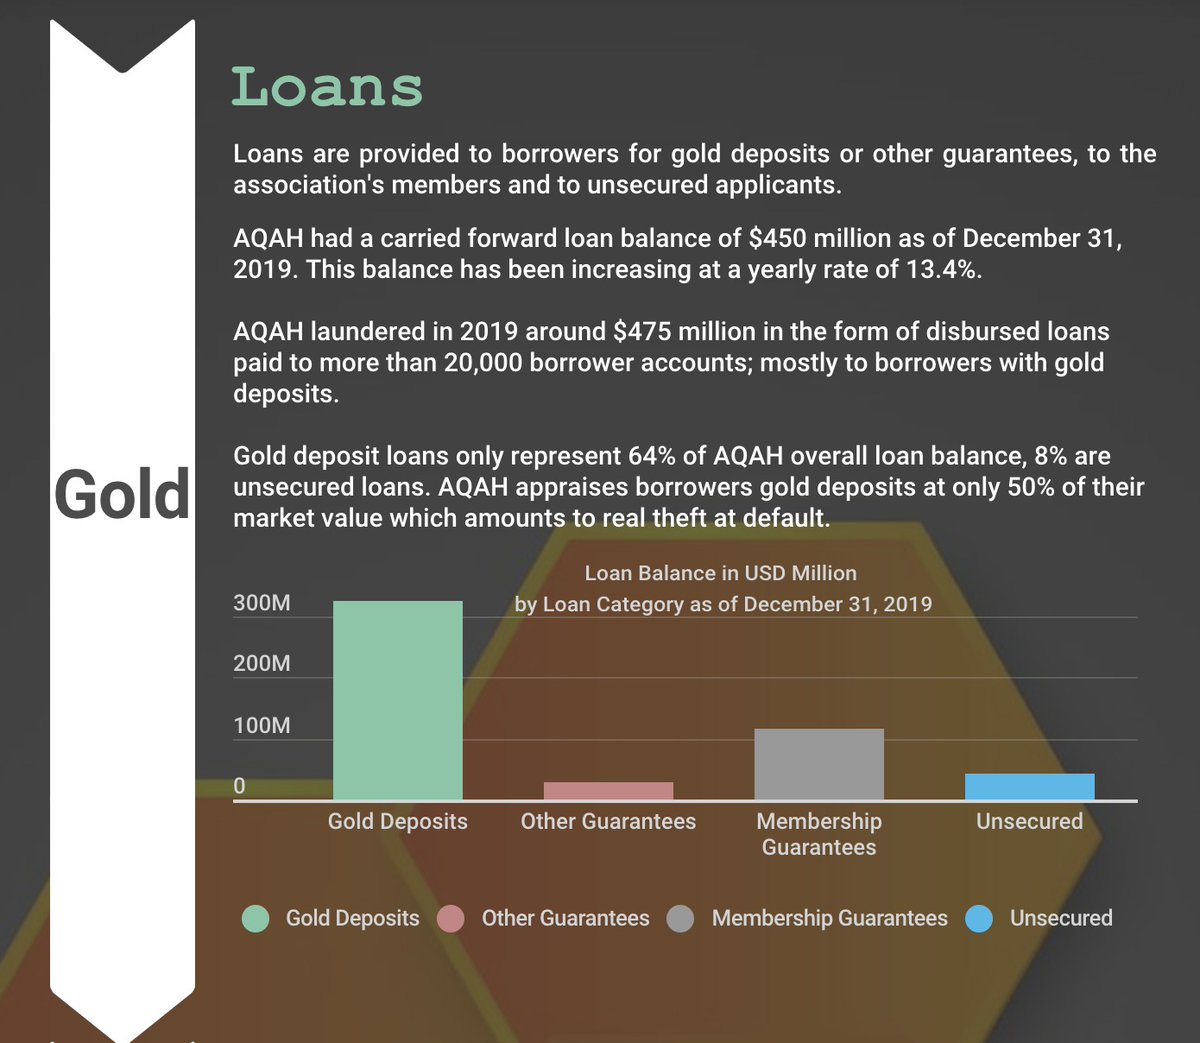 Loans are provided to borrowers for gold deposits or other guarantees, to the association's members and to unsecured applicants.AQAH had a carried forward loan balance of $450 million as of December 31, 2019. This balance has been increasing at a yearly rate of 13.4%.